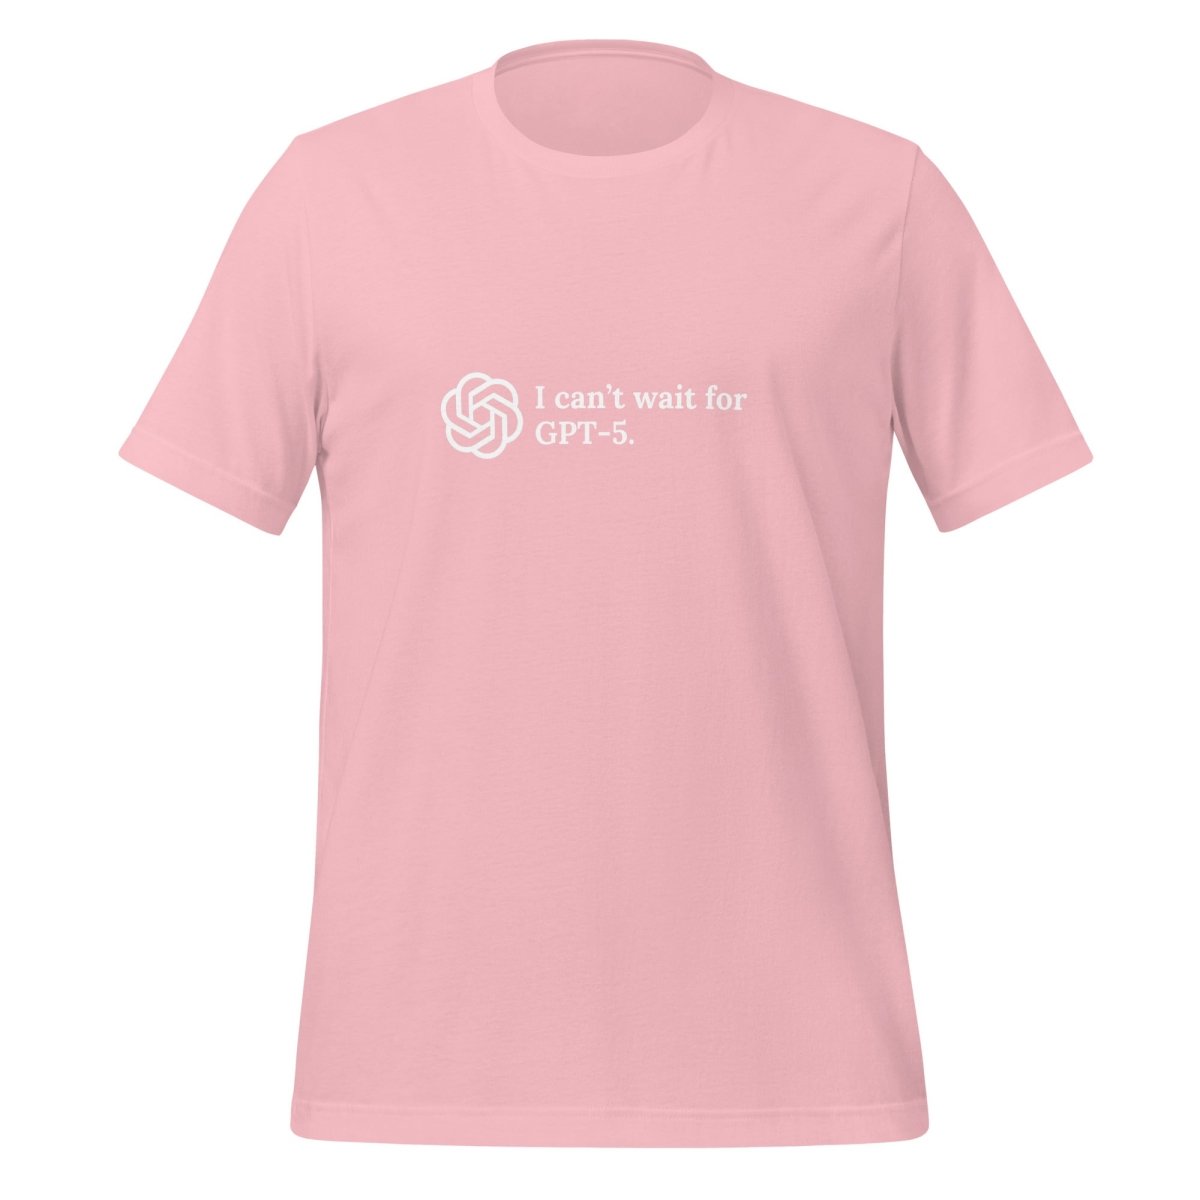 I can't wait for GPT - 5. T - Shirt (unisex) - Pink - AI Store